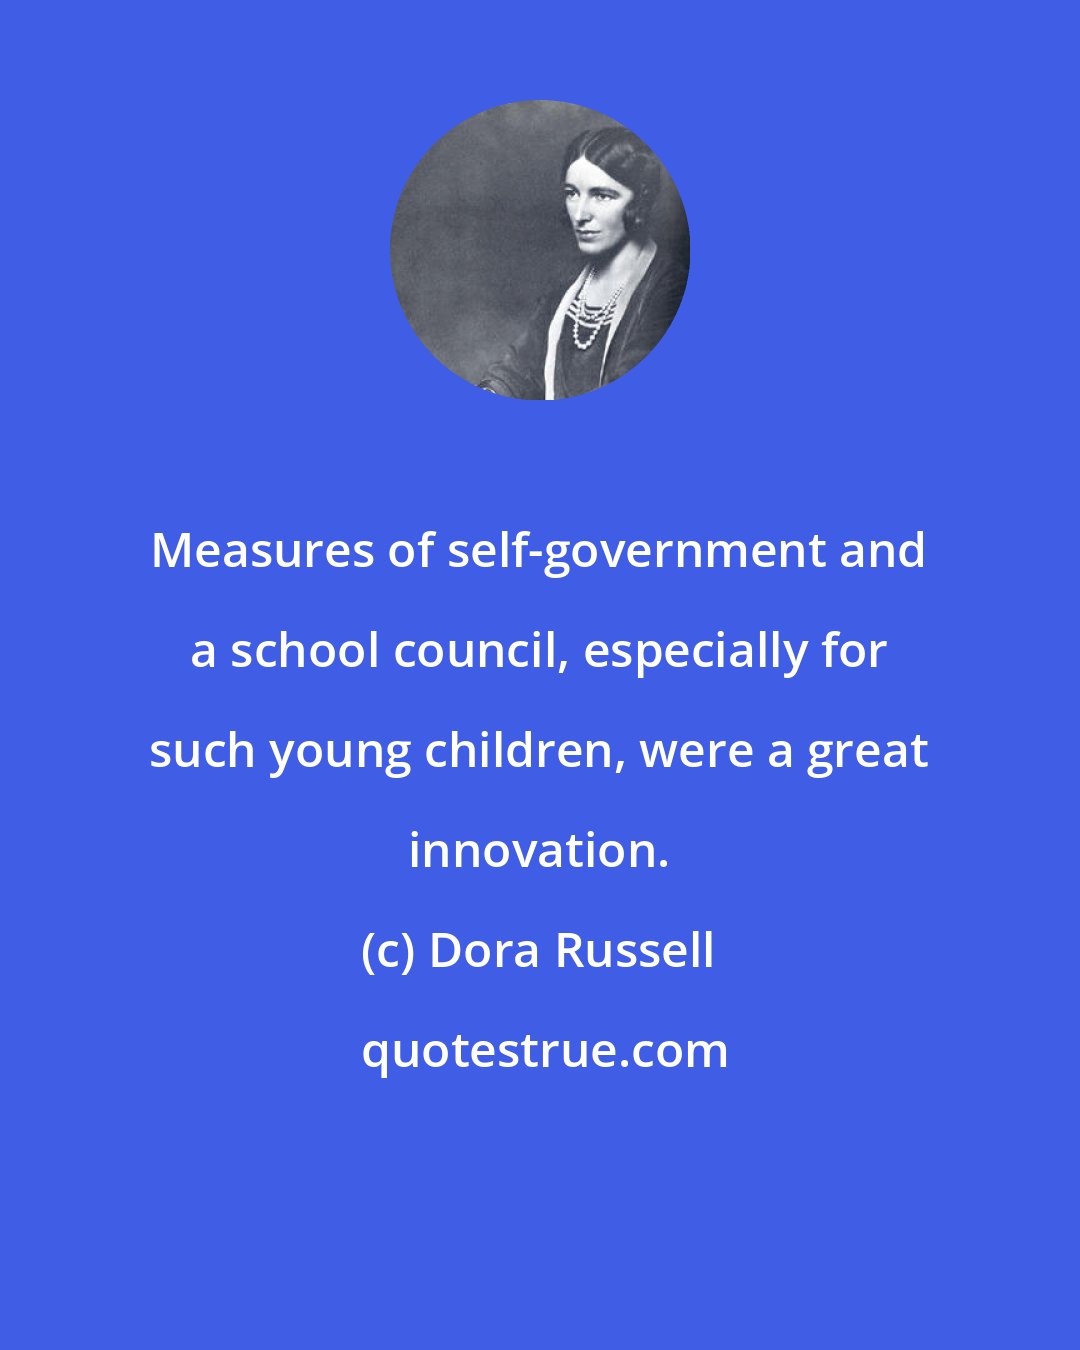 Dora Russell: Measures of self-government and a school council, especially for such young children, were a great innovation.